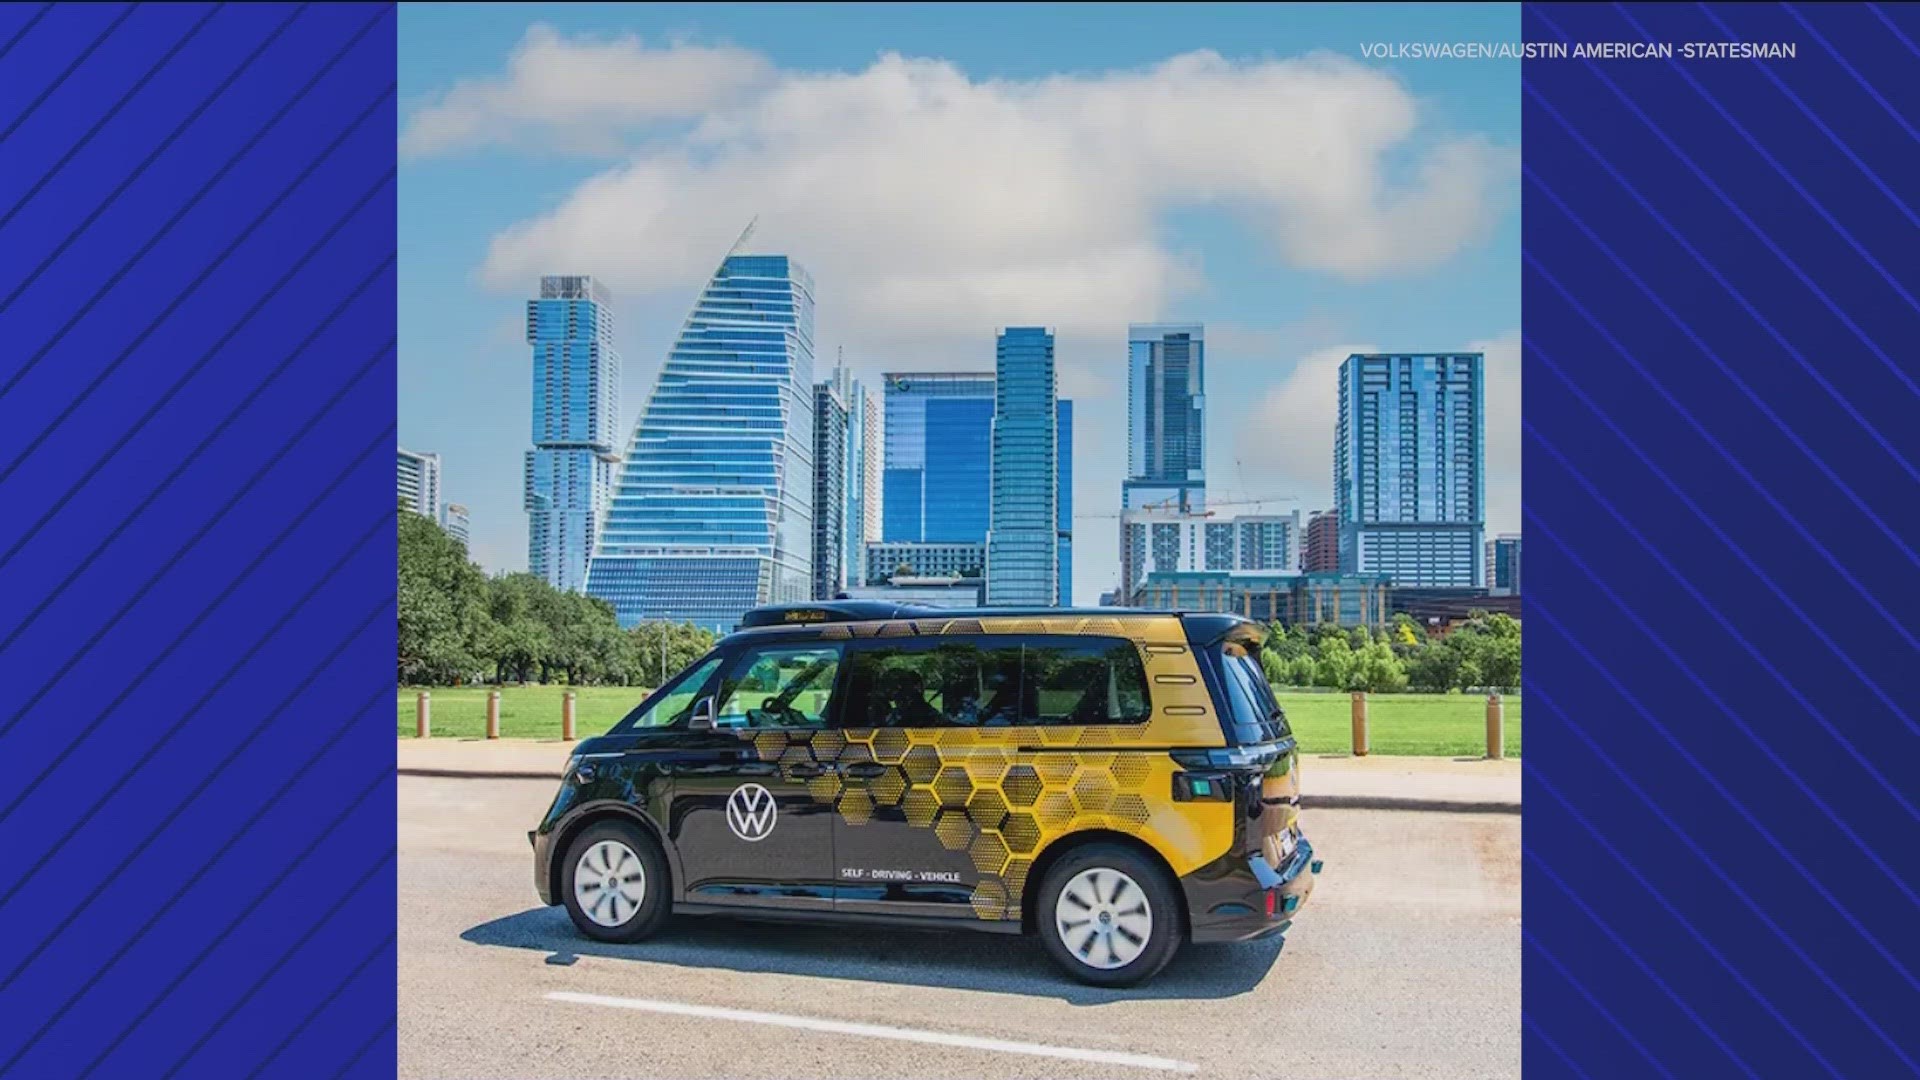 Volkswagen will test its autonomous vehicles in Austin, the first U.S. city to be part of the program.